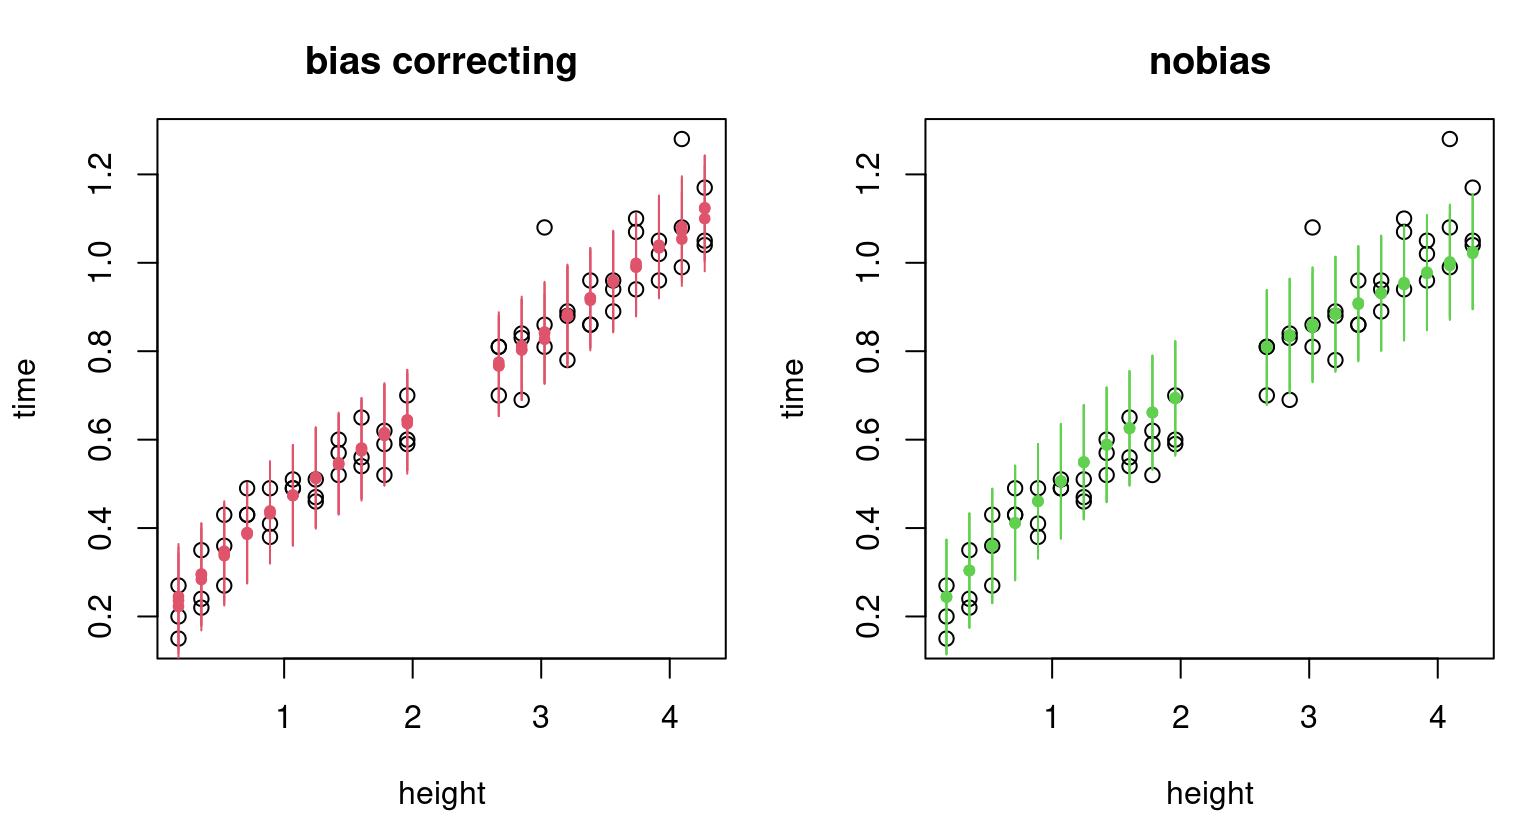 Leave-one-out CV results in ordinary (left) and nobias (right) alternatives. Filled dots show predictive means; vertical lines indicate 90% intervals.